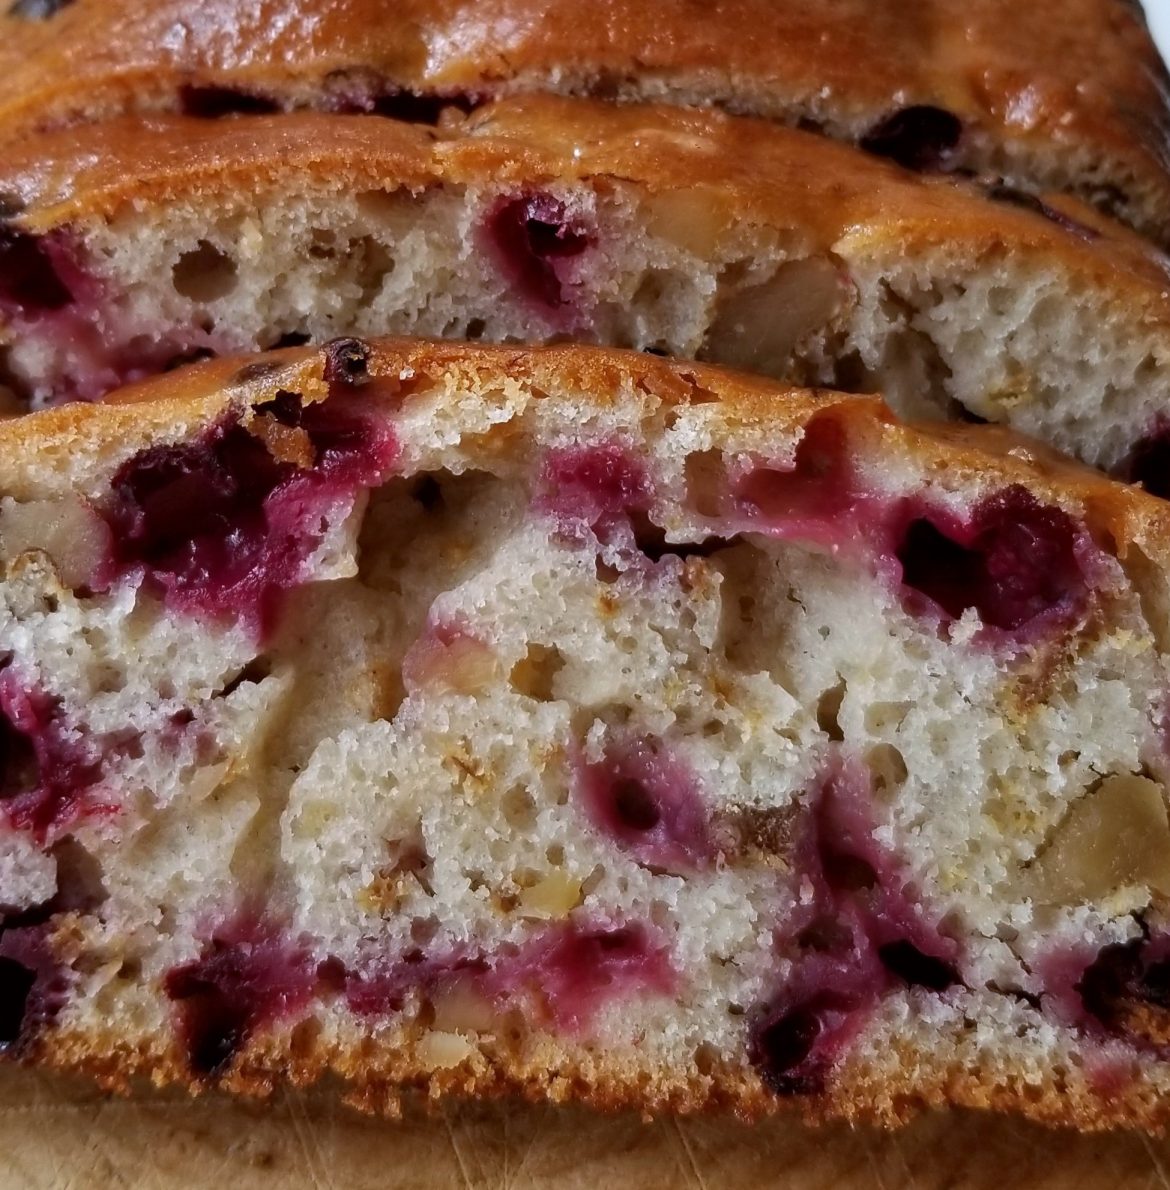 Slices of cranberry bread